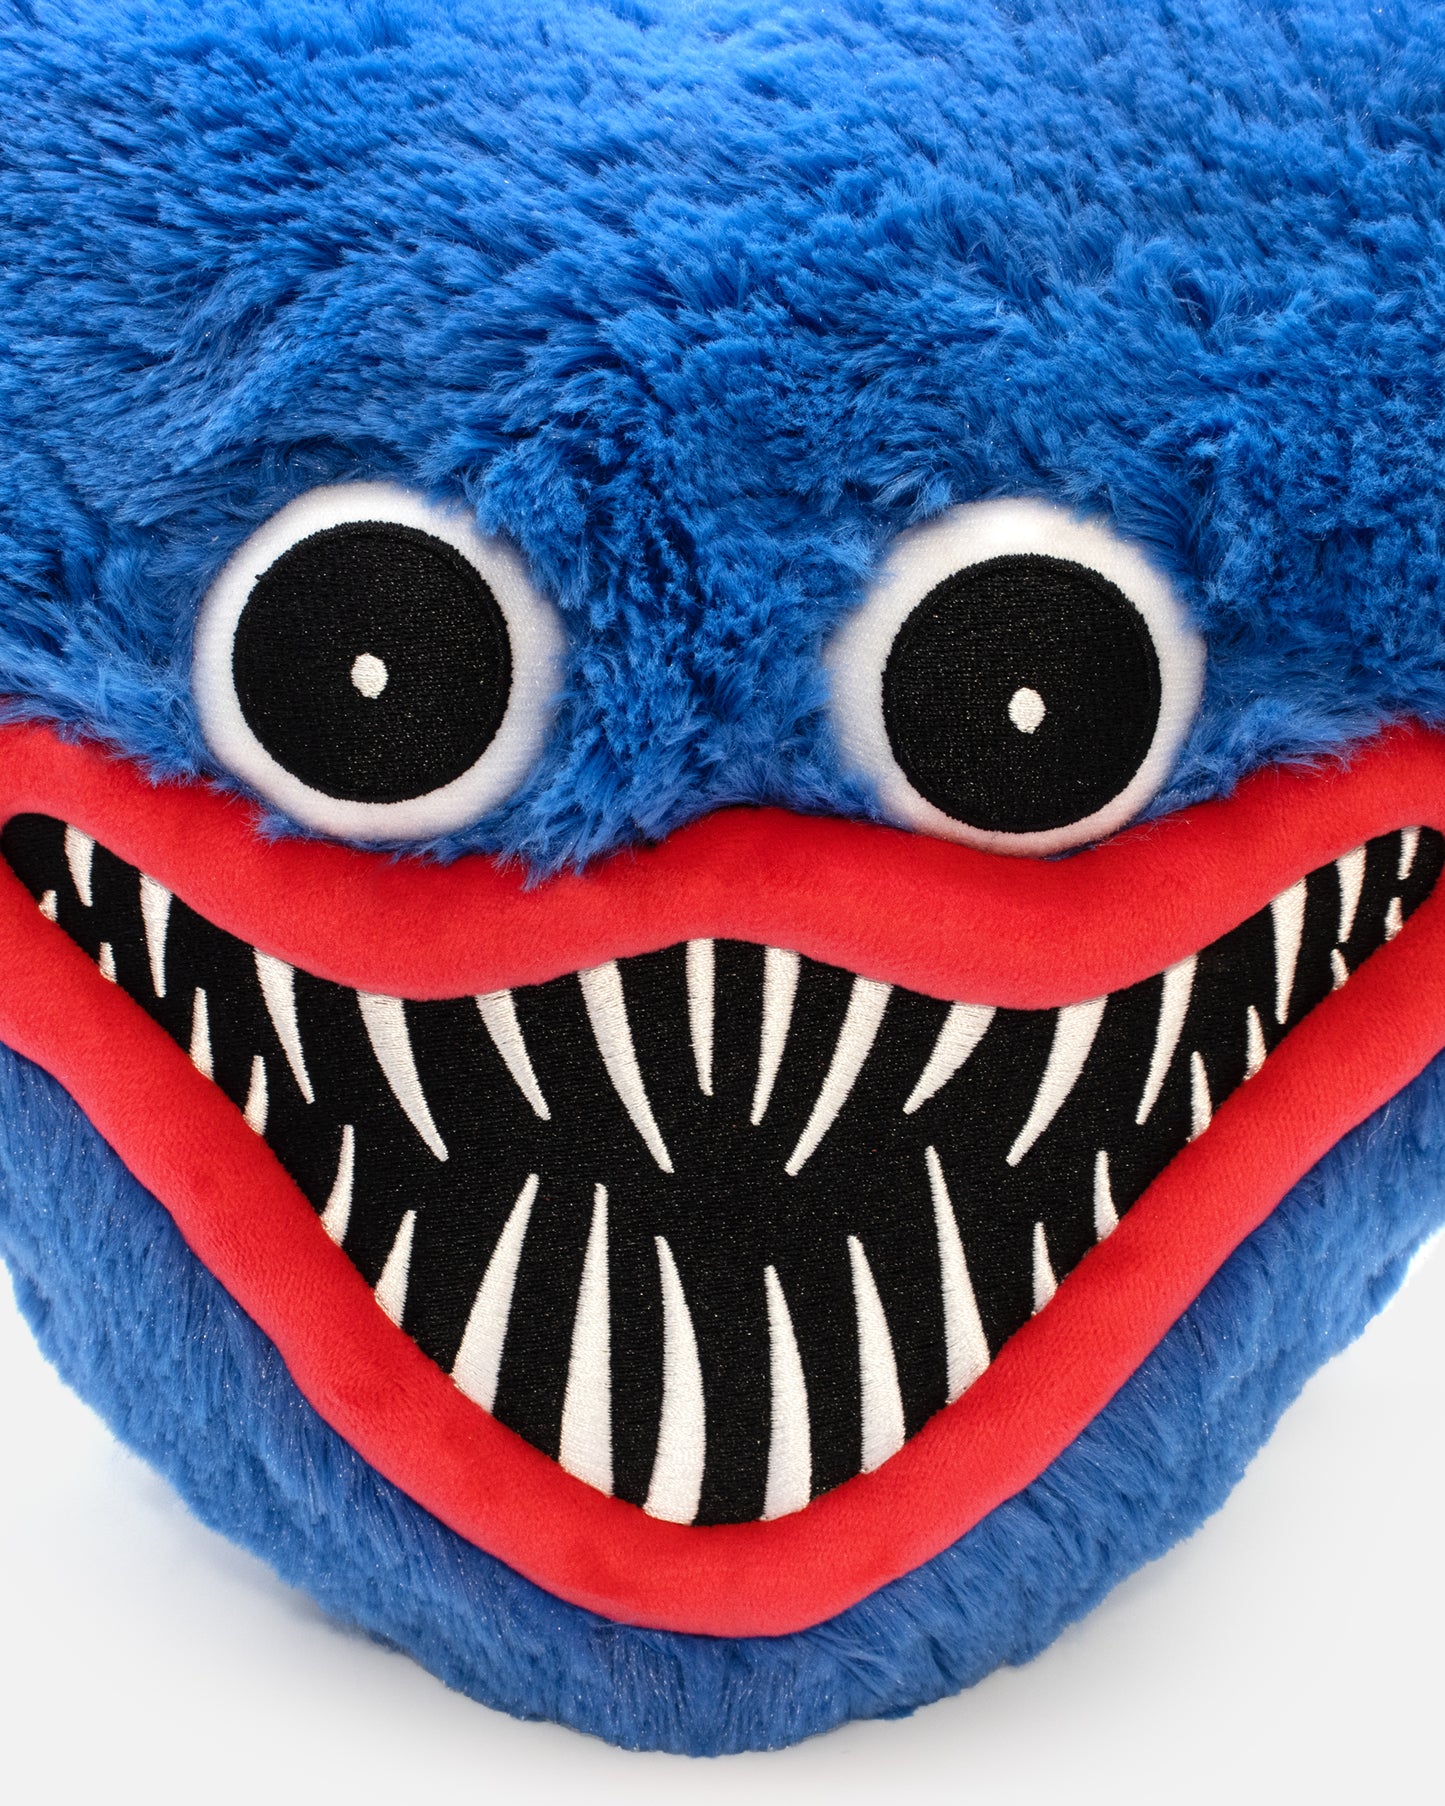 scary huggy wuggy poppy playtime pillow plush close up of face